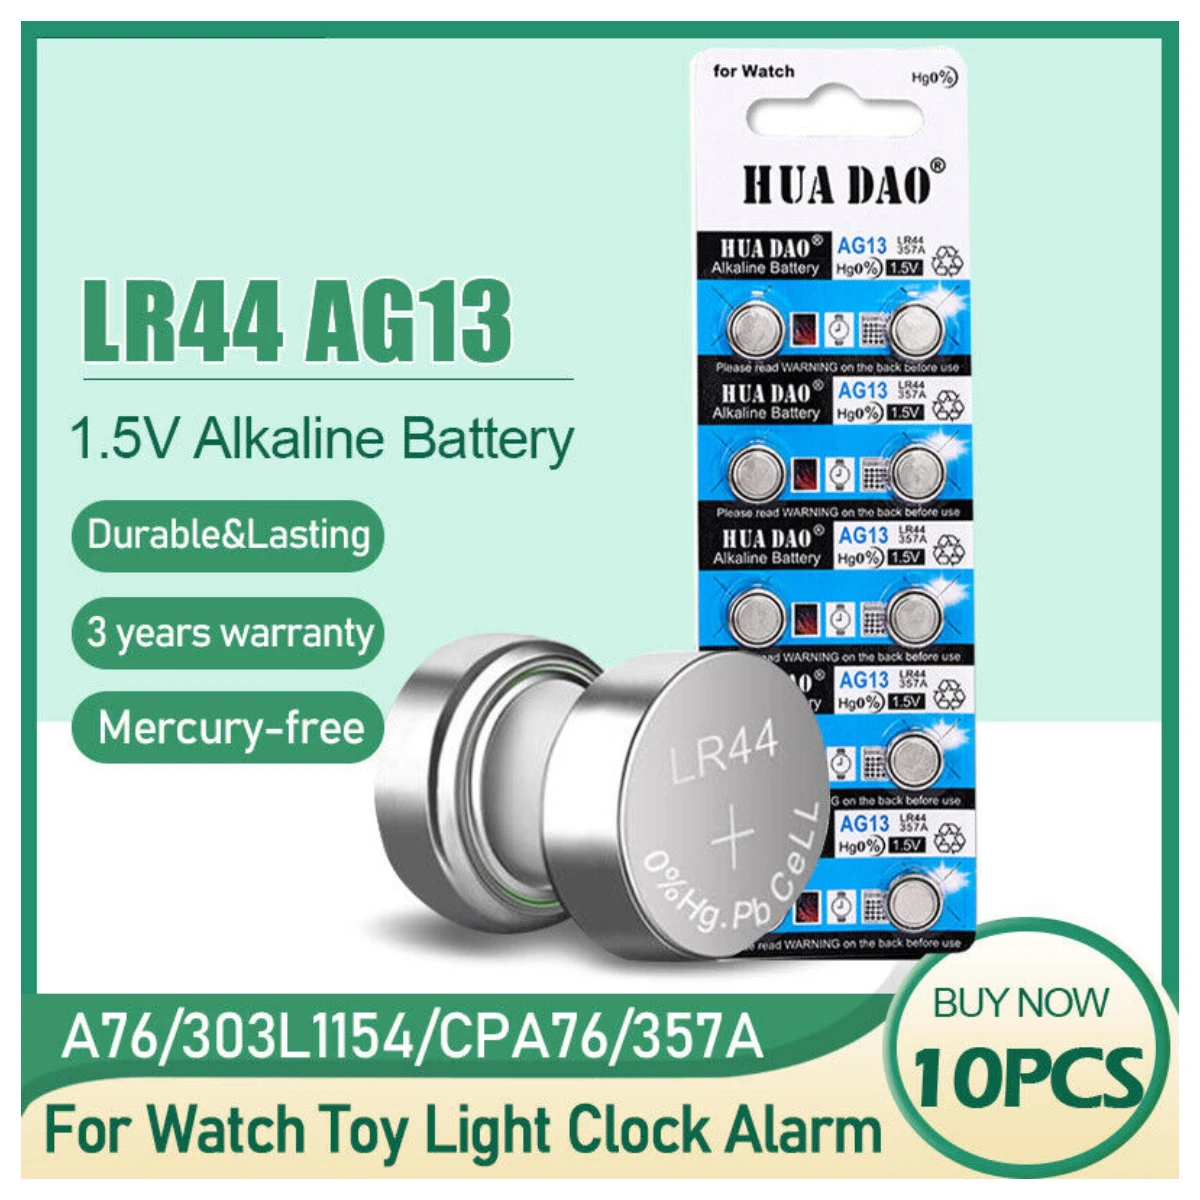 

New 10 PCS New LR44 AG13 L1154 1.5V Alkaline Button Cell Coin Pack Battery for toys，Watches，Glow-in-the-dark toy light